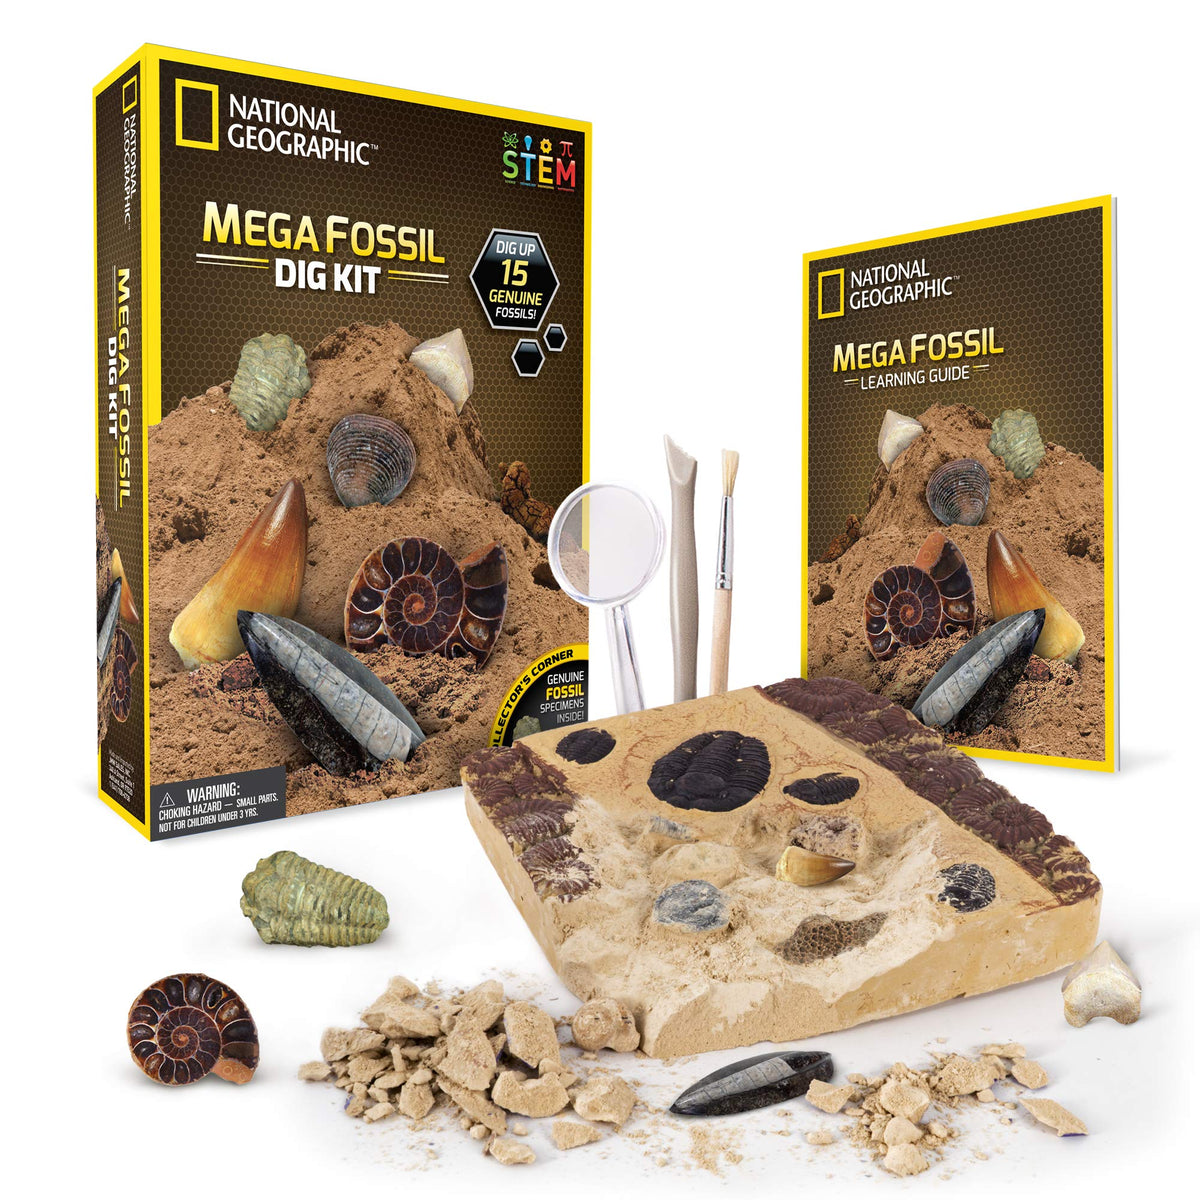 NATIONAL GEOGRAPHIC Mega Fossil Dig Kit – Excavate 15 real